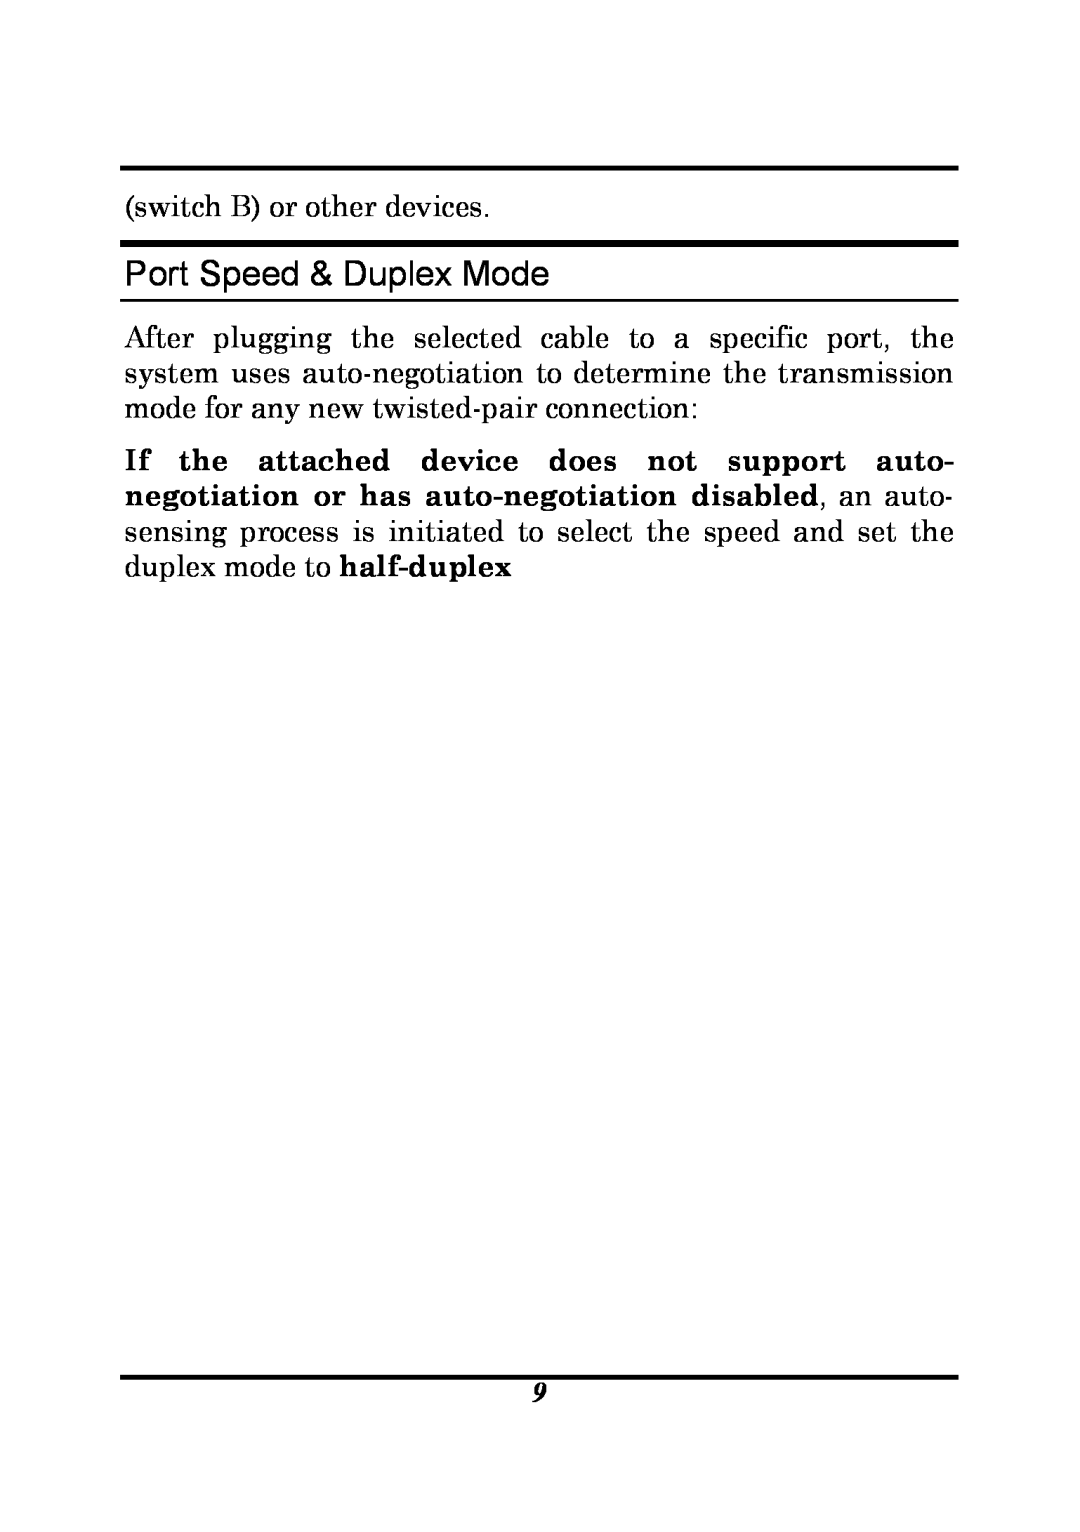 D-Link DSS-5 manual Port Speed & Duplex Mode, switch B or other devices 